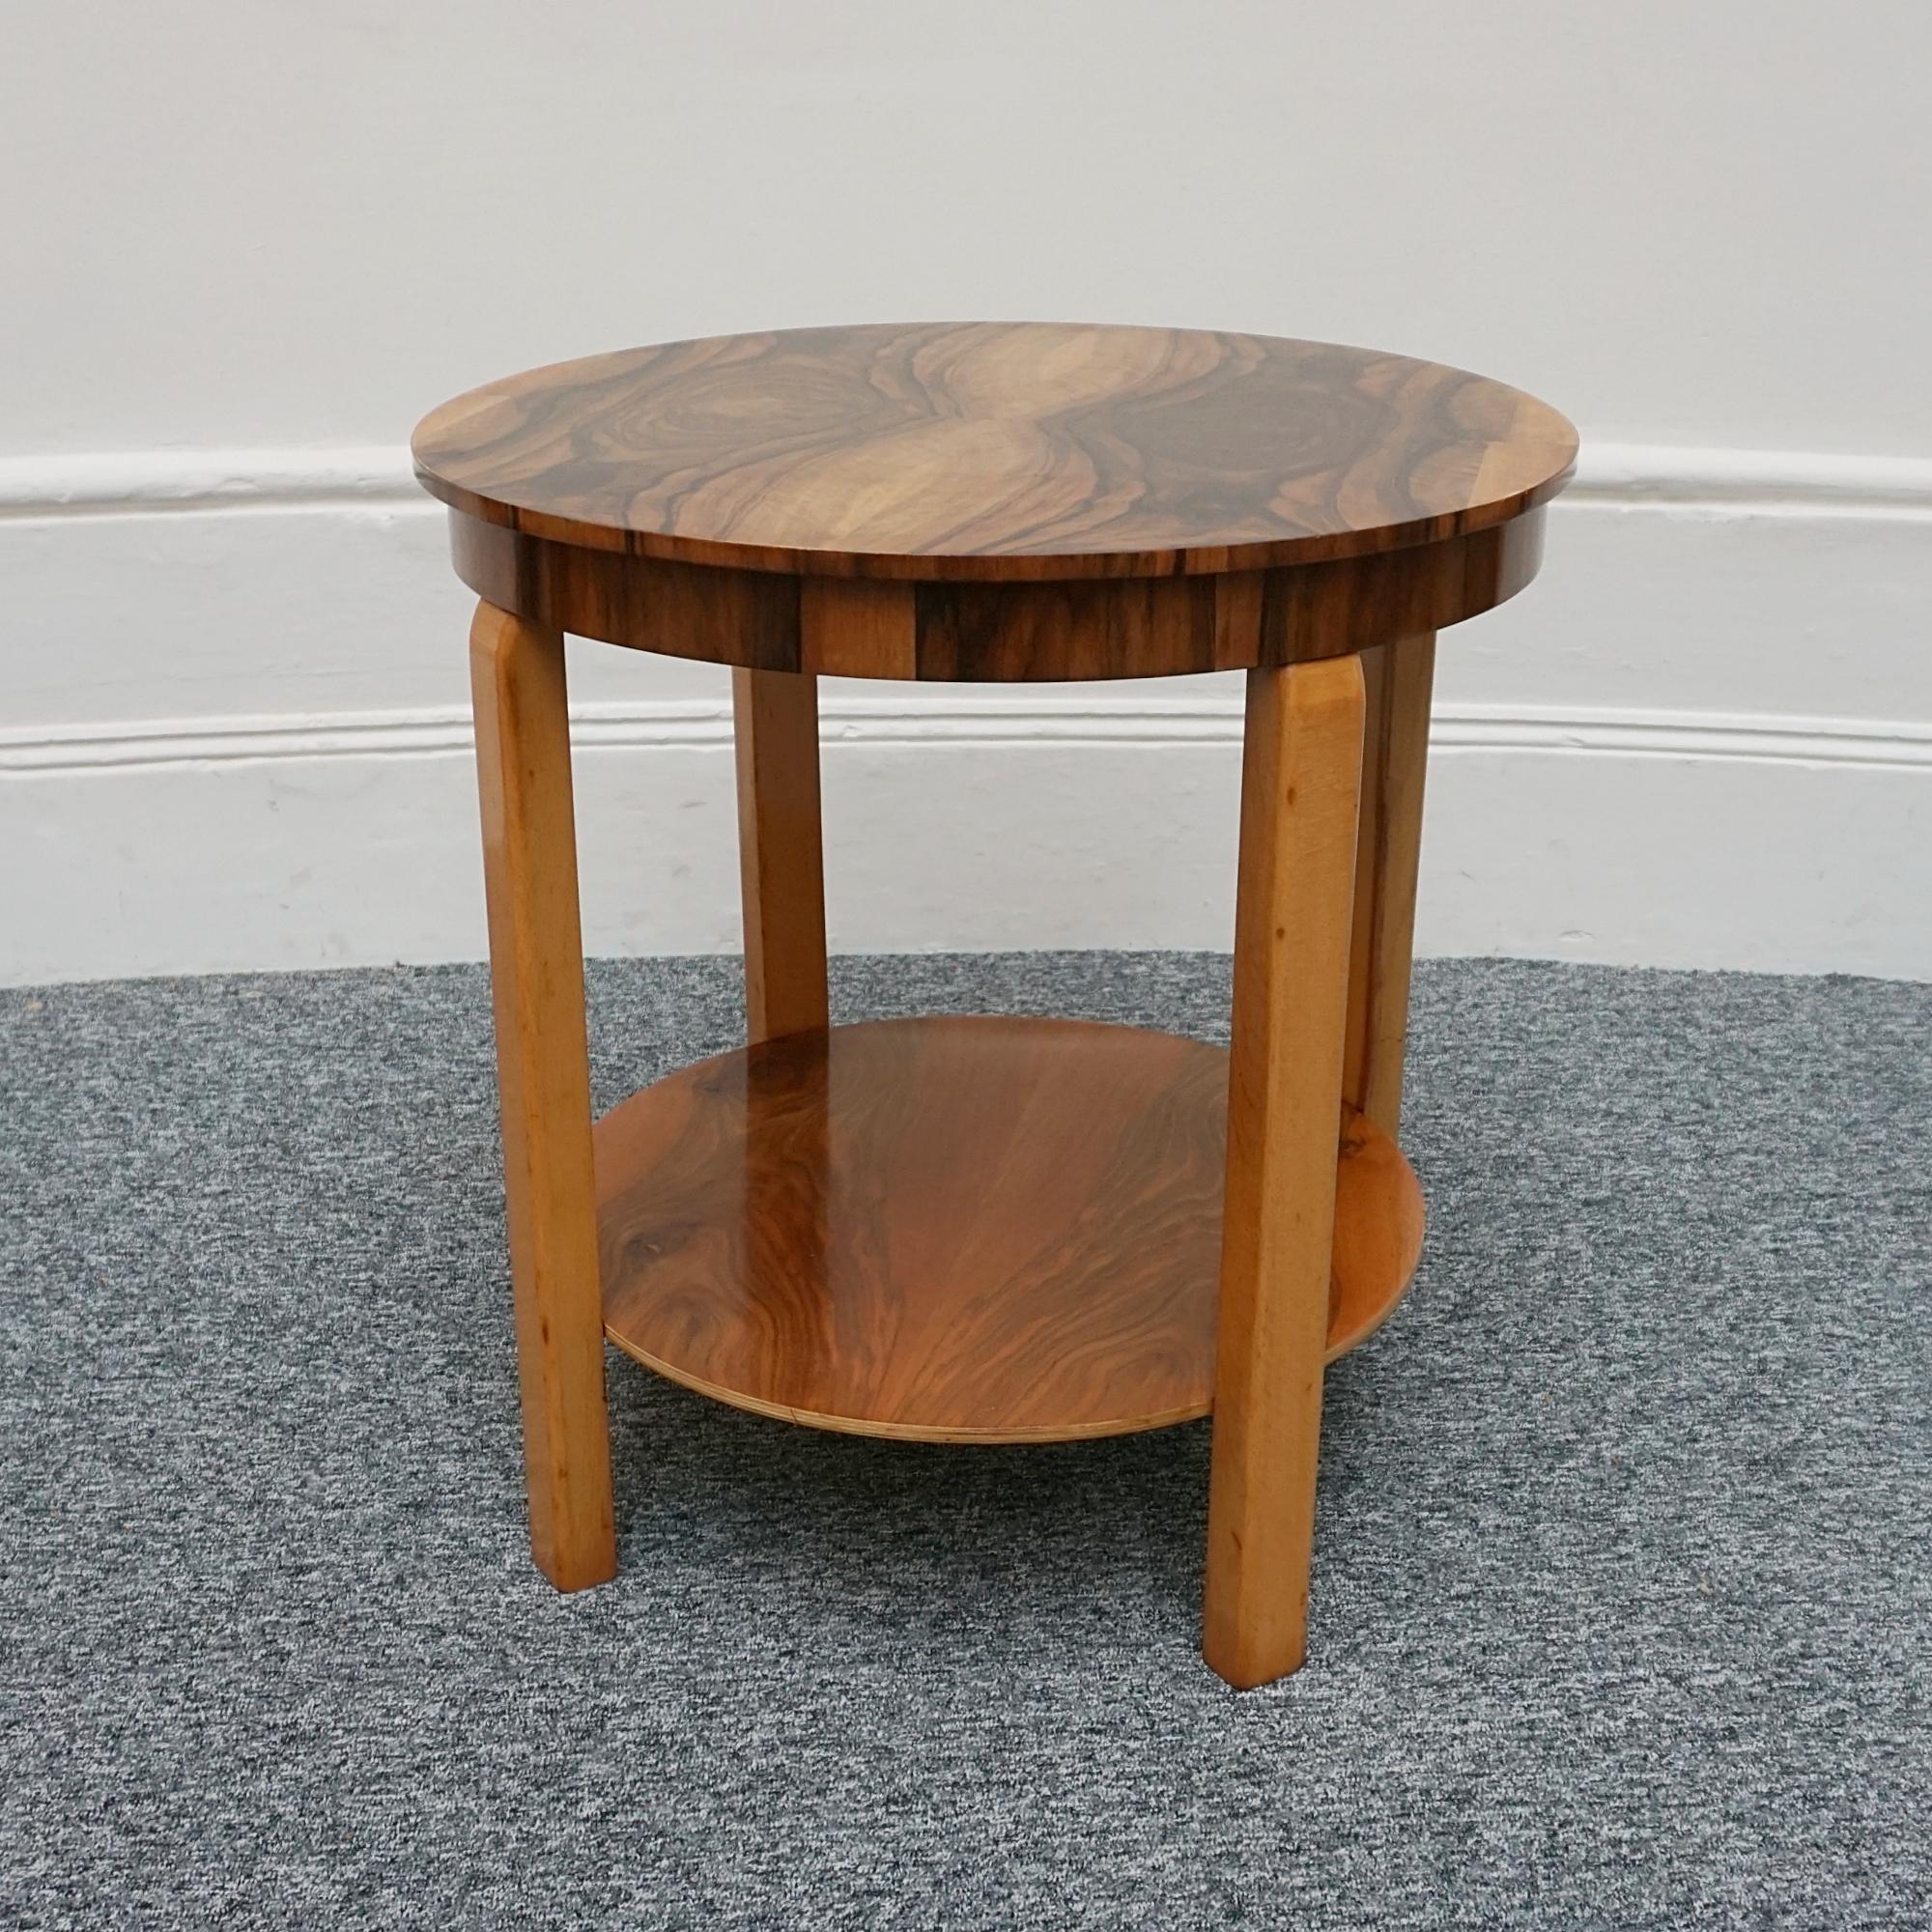 An Art Deco rounded two tiered side table. Burr walnut with figured walnut and solid walnut legs.

Dimensions: H 61cm W/D: 60cm

Origin: English

Date: Circa 1935

Item Number: 1011235

 All of our furniture is extensively polished and restored